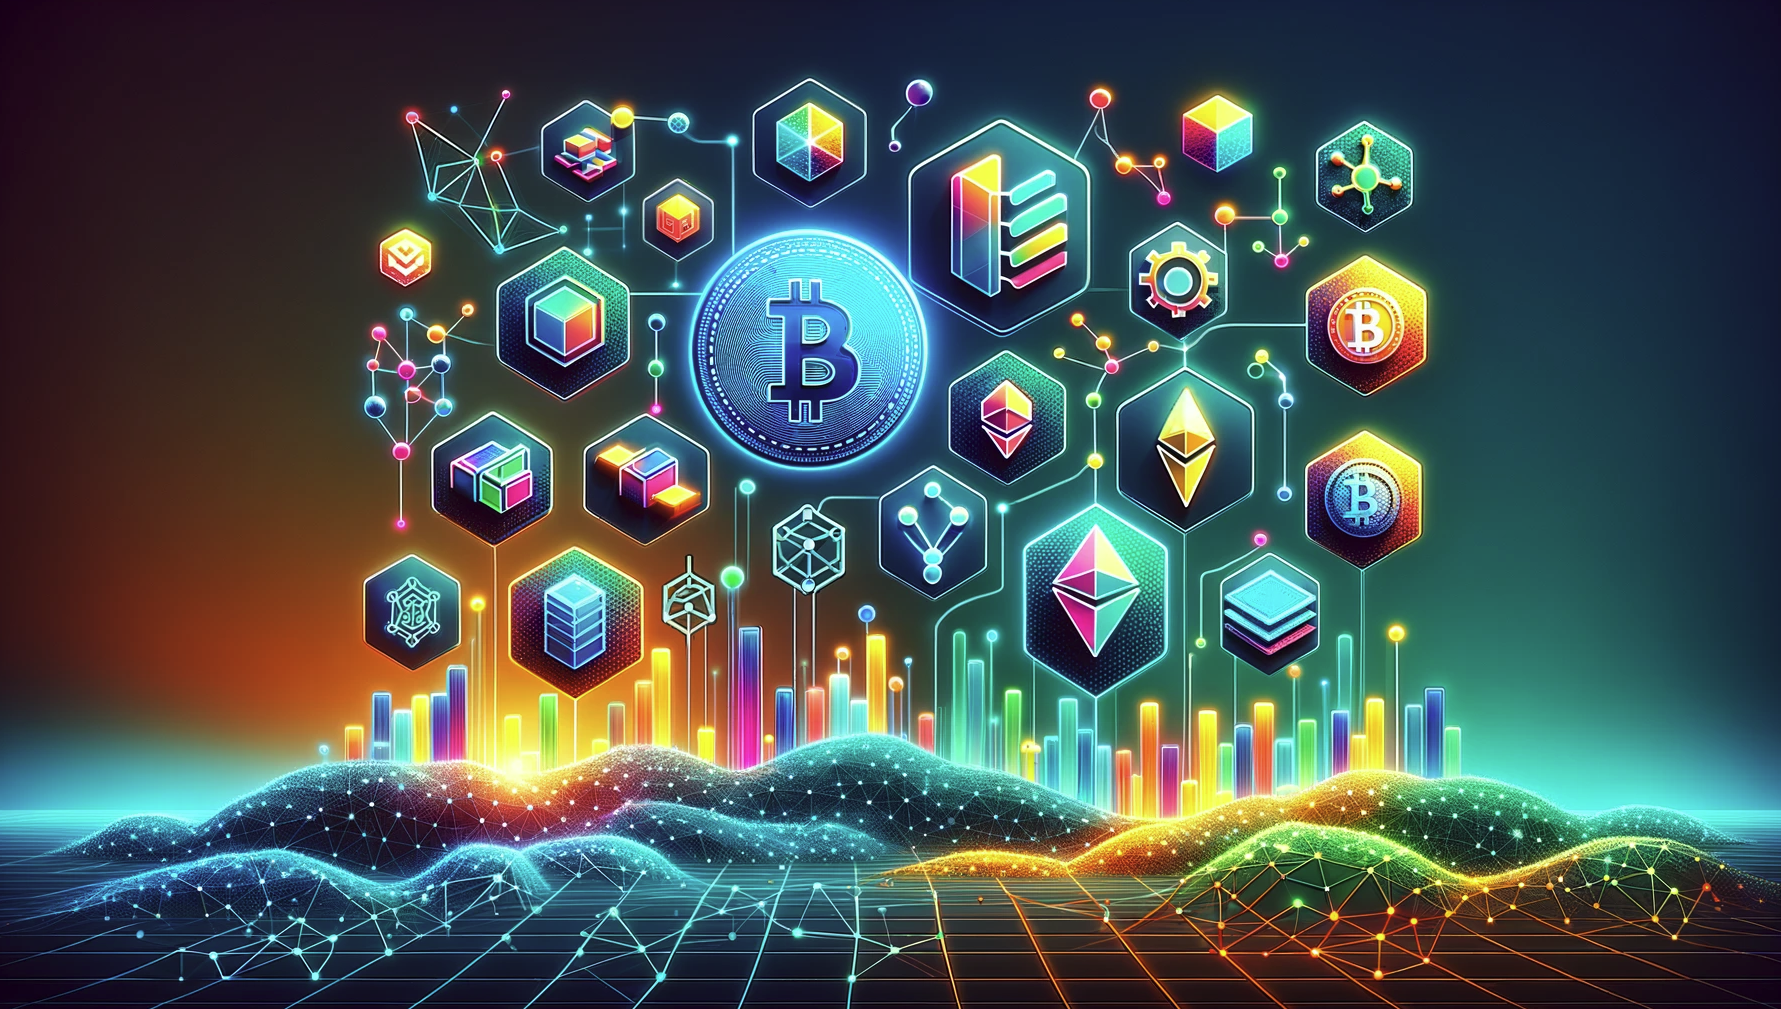 Showing crypto icons in an illustrative art picture